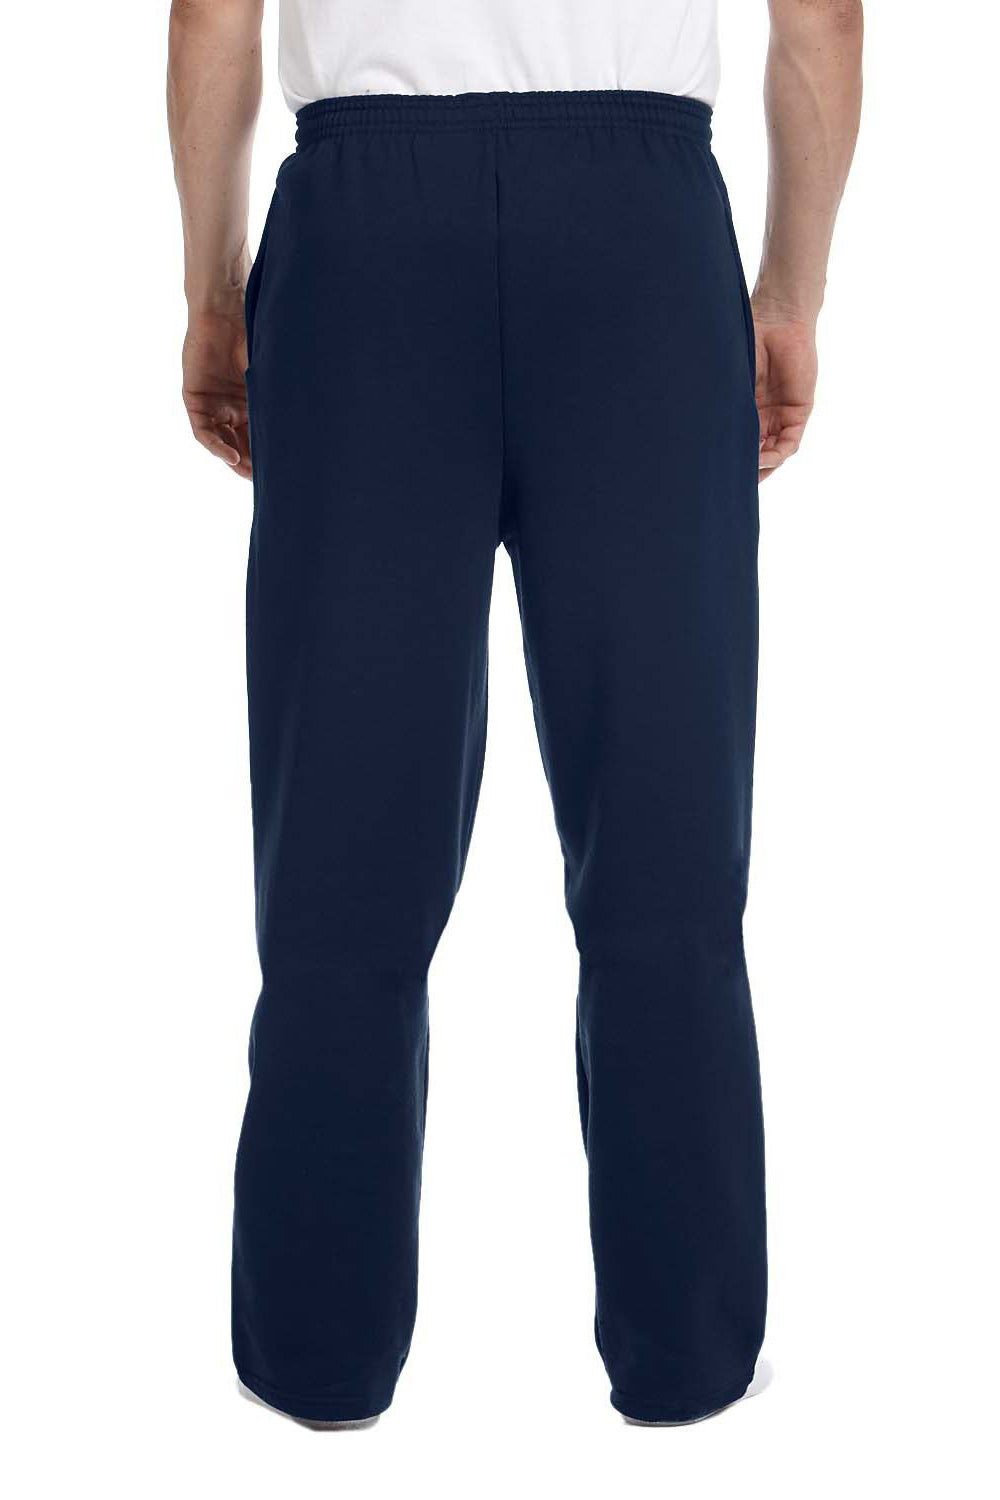 Champion P800 - Powerblend® Open-Bottom Sweatpants with Pockets